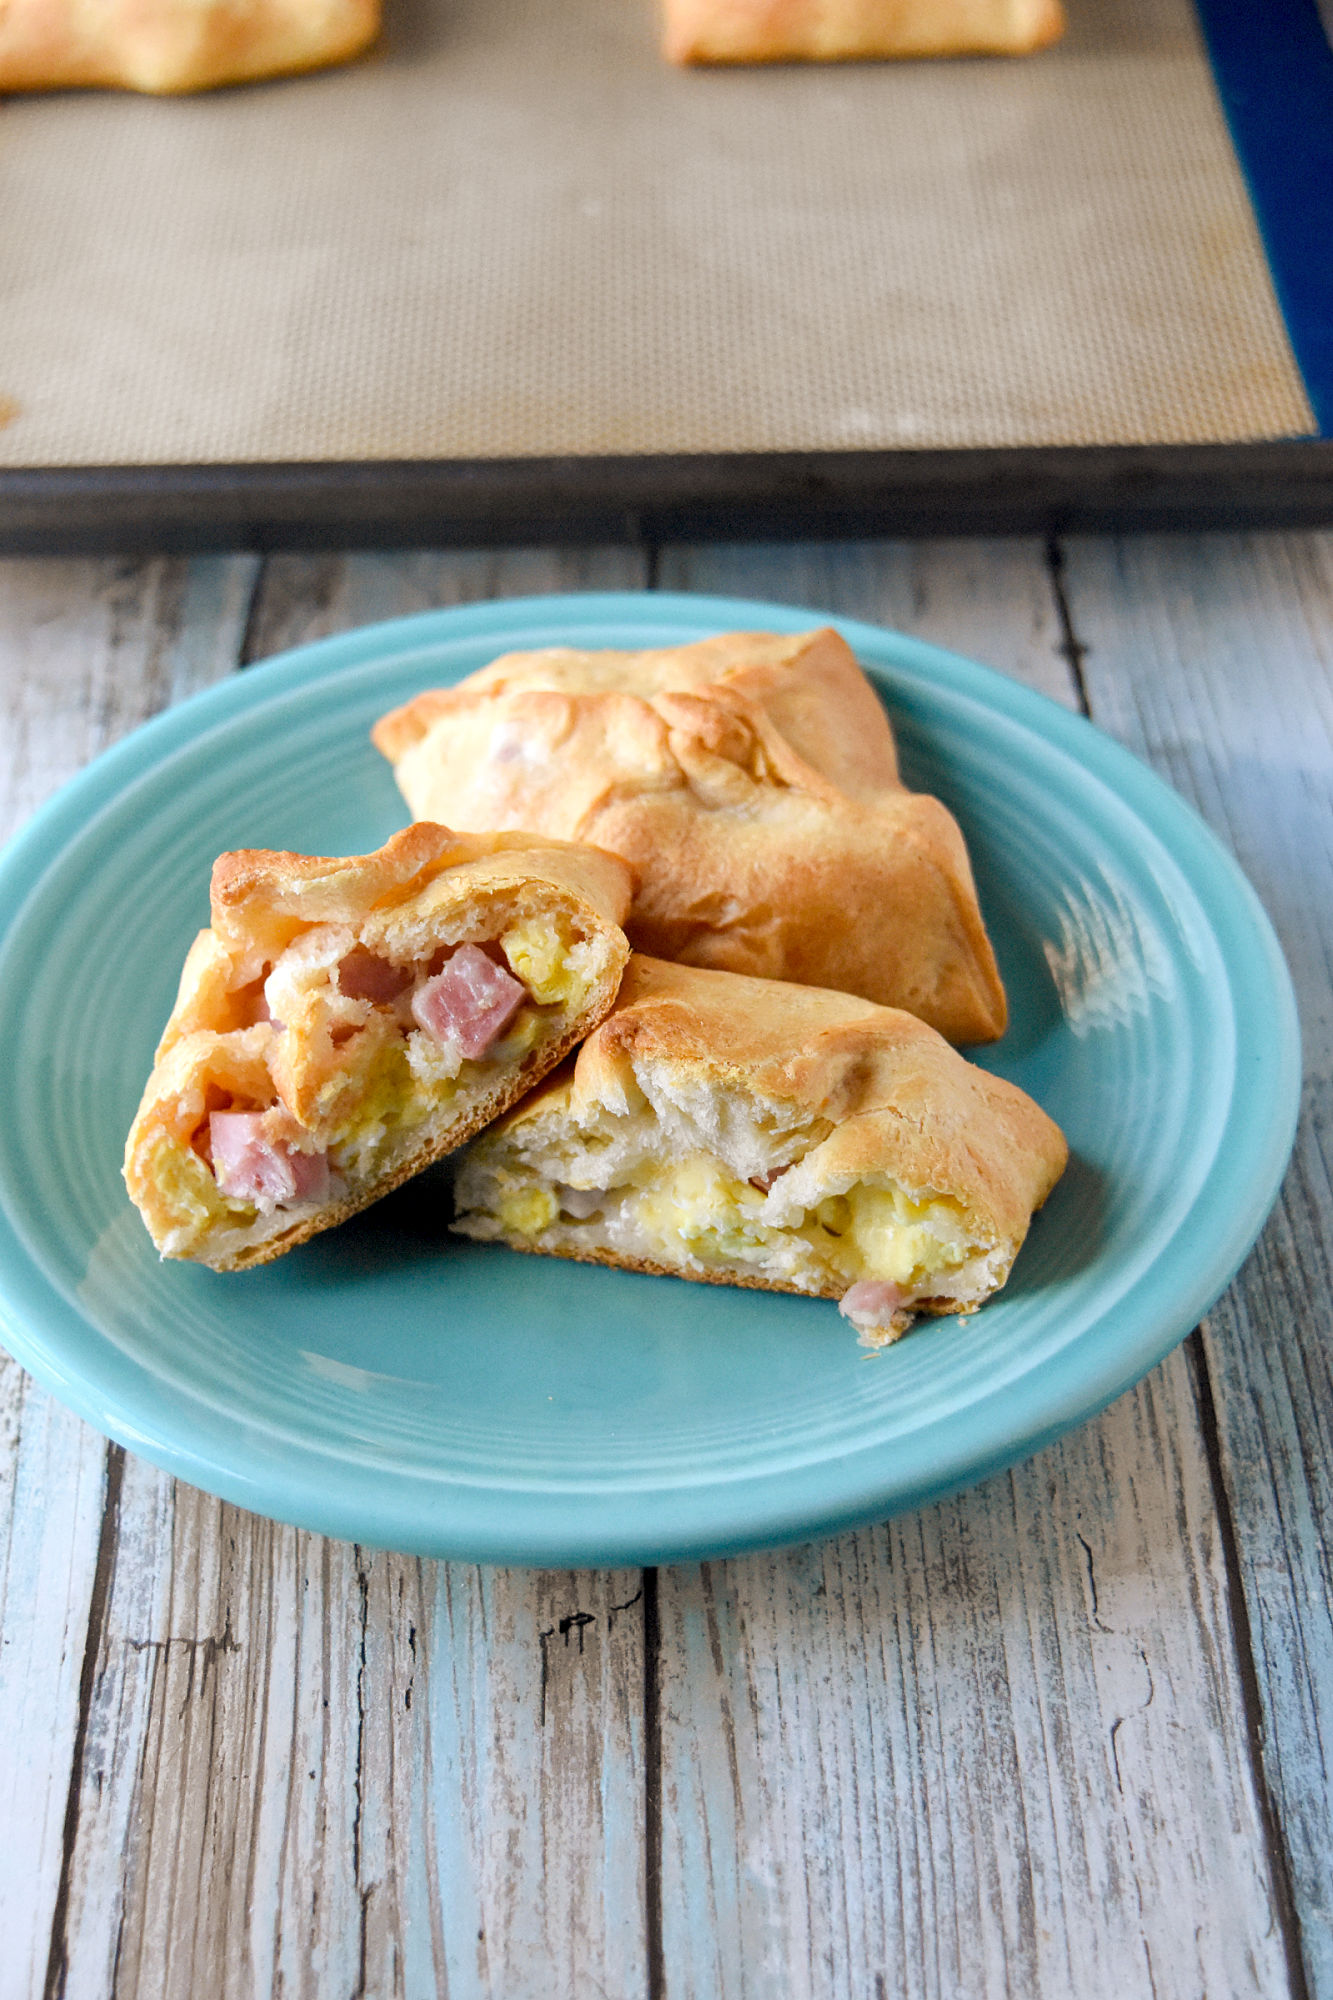 Irish Style Jambon Pastry are pastry pockets filled with cheese and cubes of ham sold at delis across Ireland. They’re the perfect snack, breakfast on the go, or appetizer for your next party. #OurFamilyTable #brunch #Irishfood #breakfast #eggsandcheese #hamandcheese